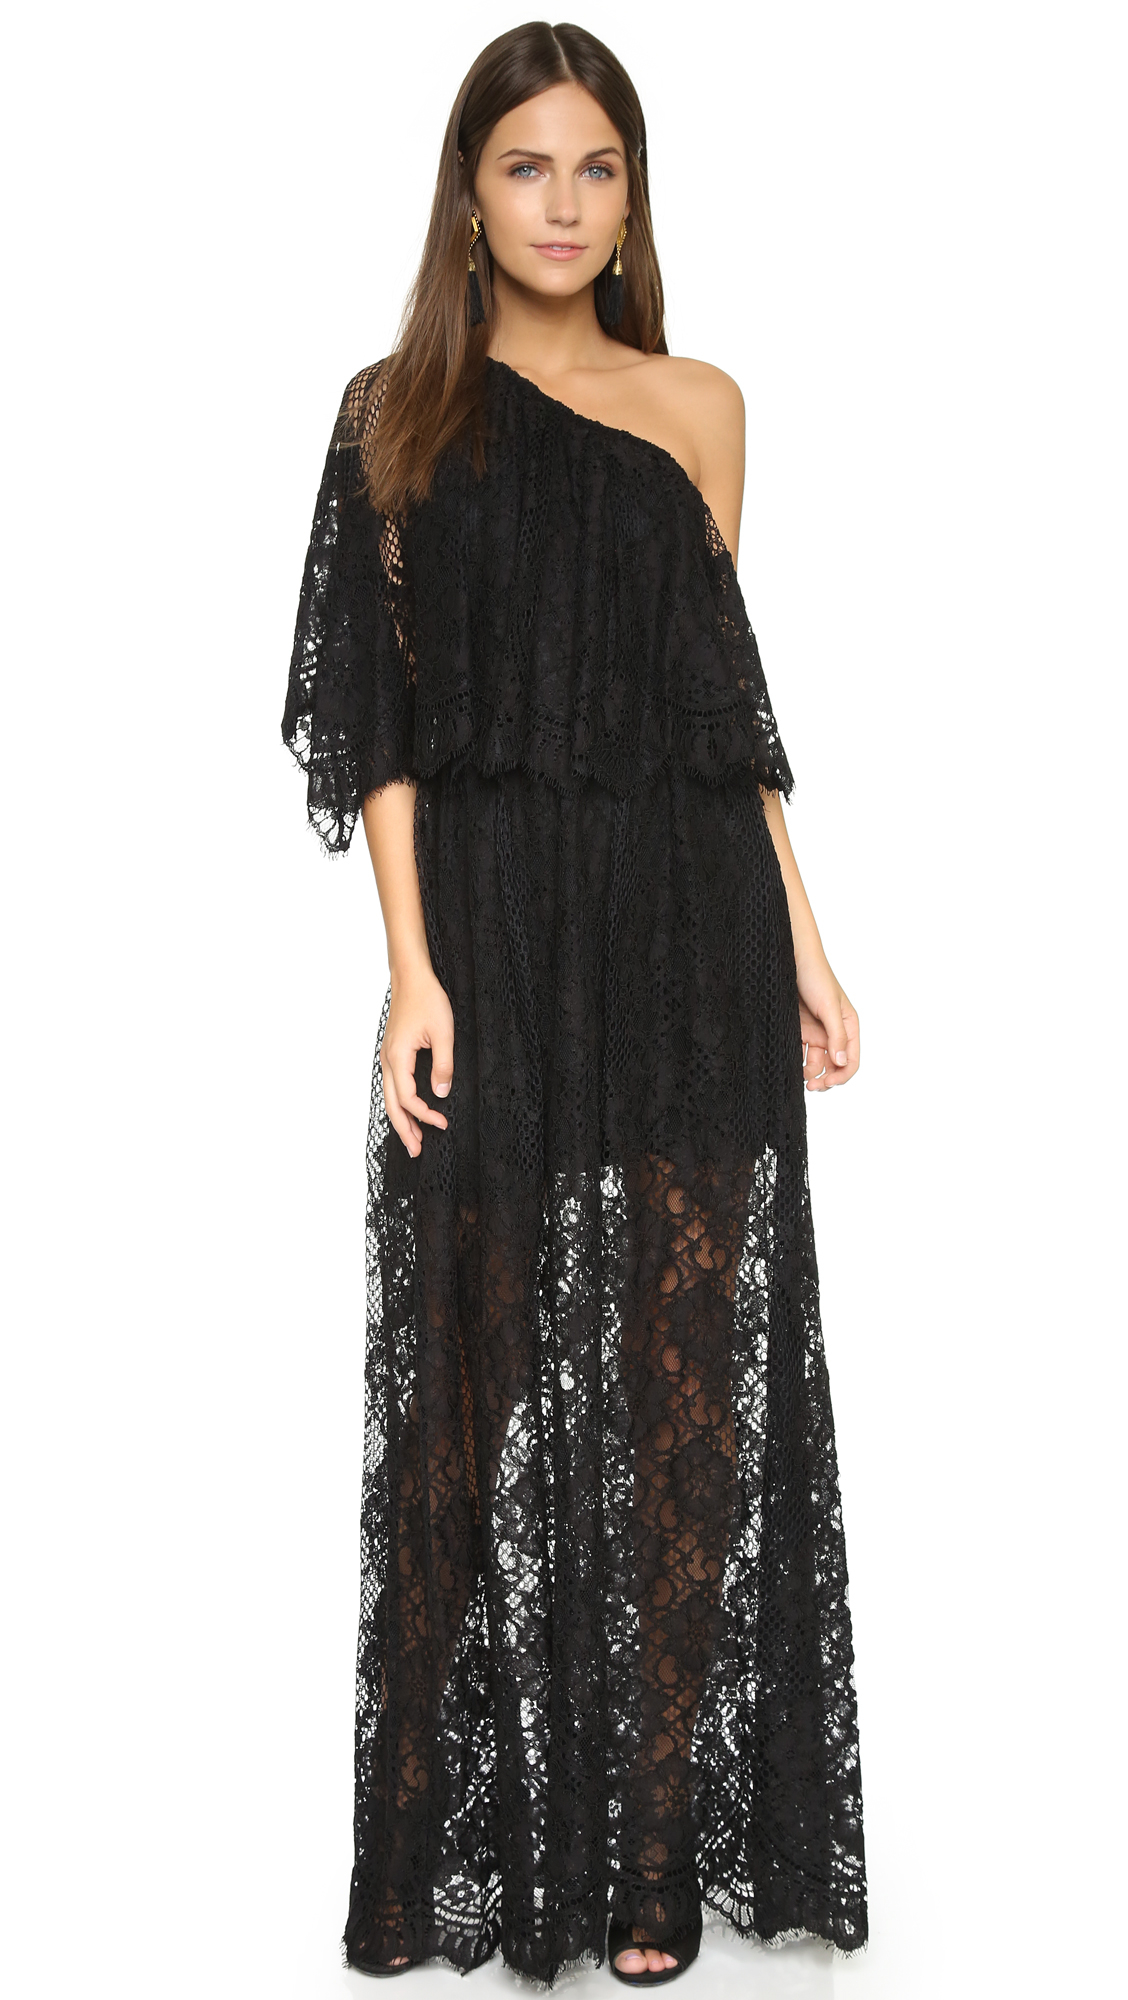 Alexis Tory One Shoulder Lace Dress - Black Lace in Black | Lyst